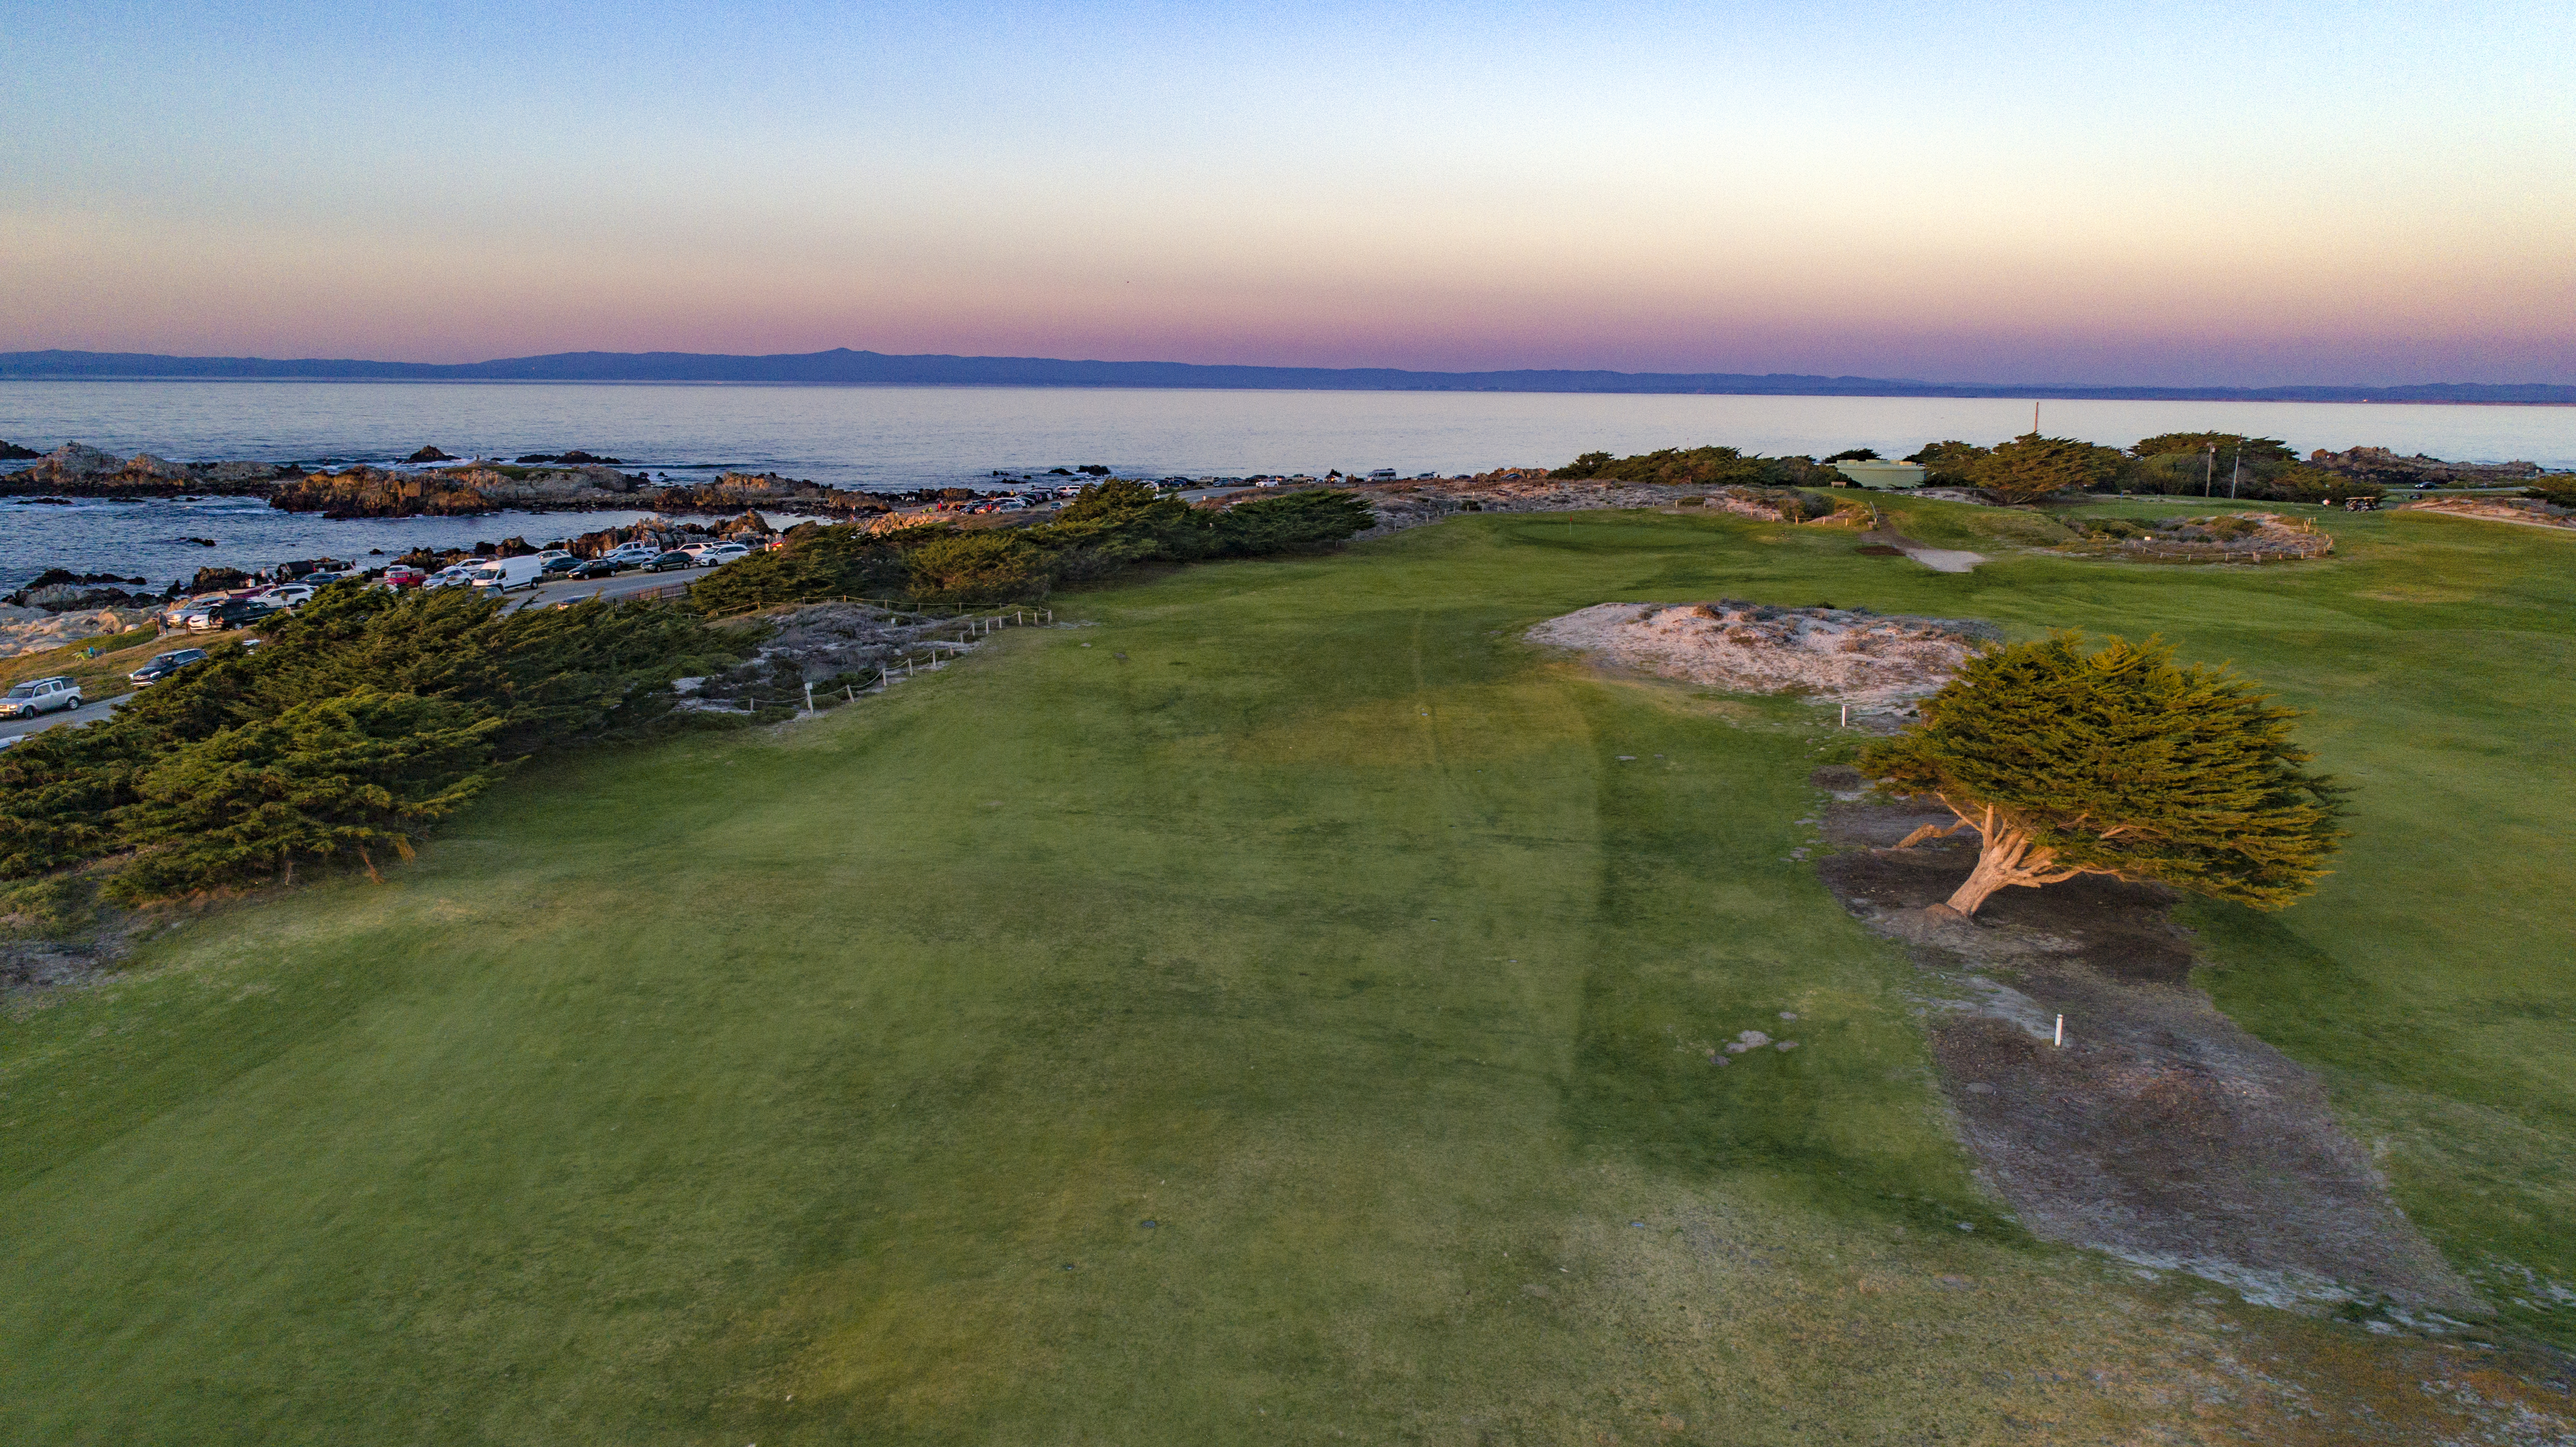 A visit to the Poor mans Pebble Beach reveals one of the best deals in golf Courses Golf Digest picture